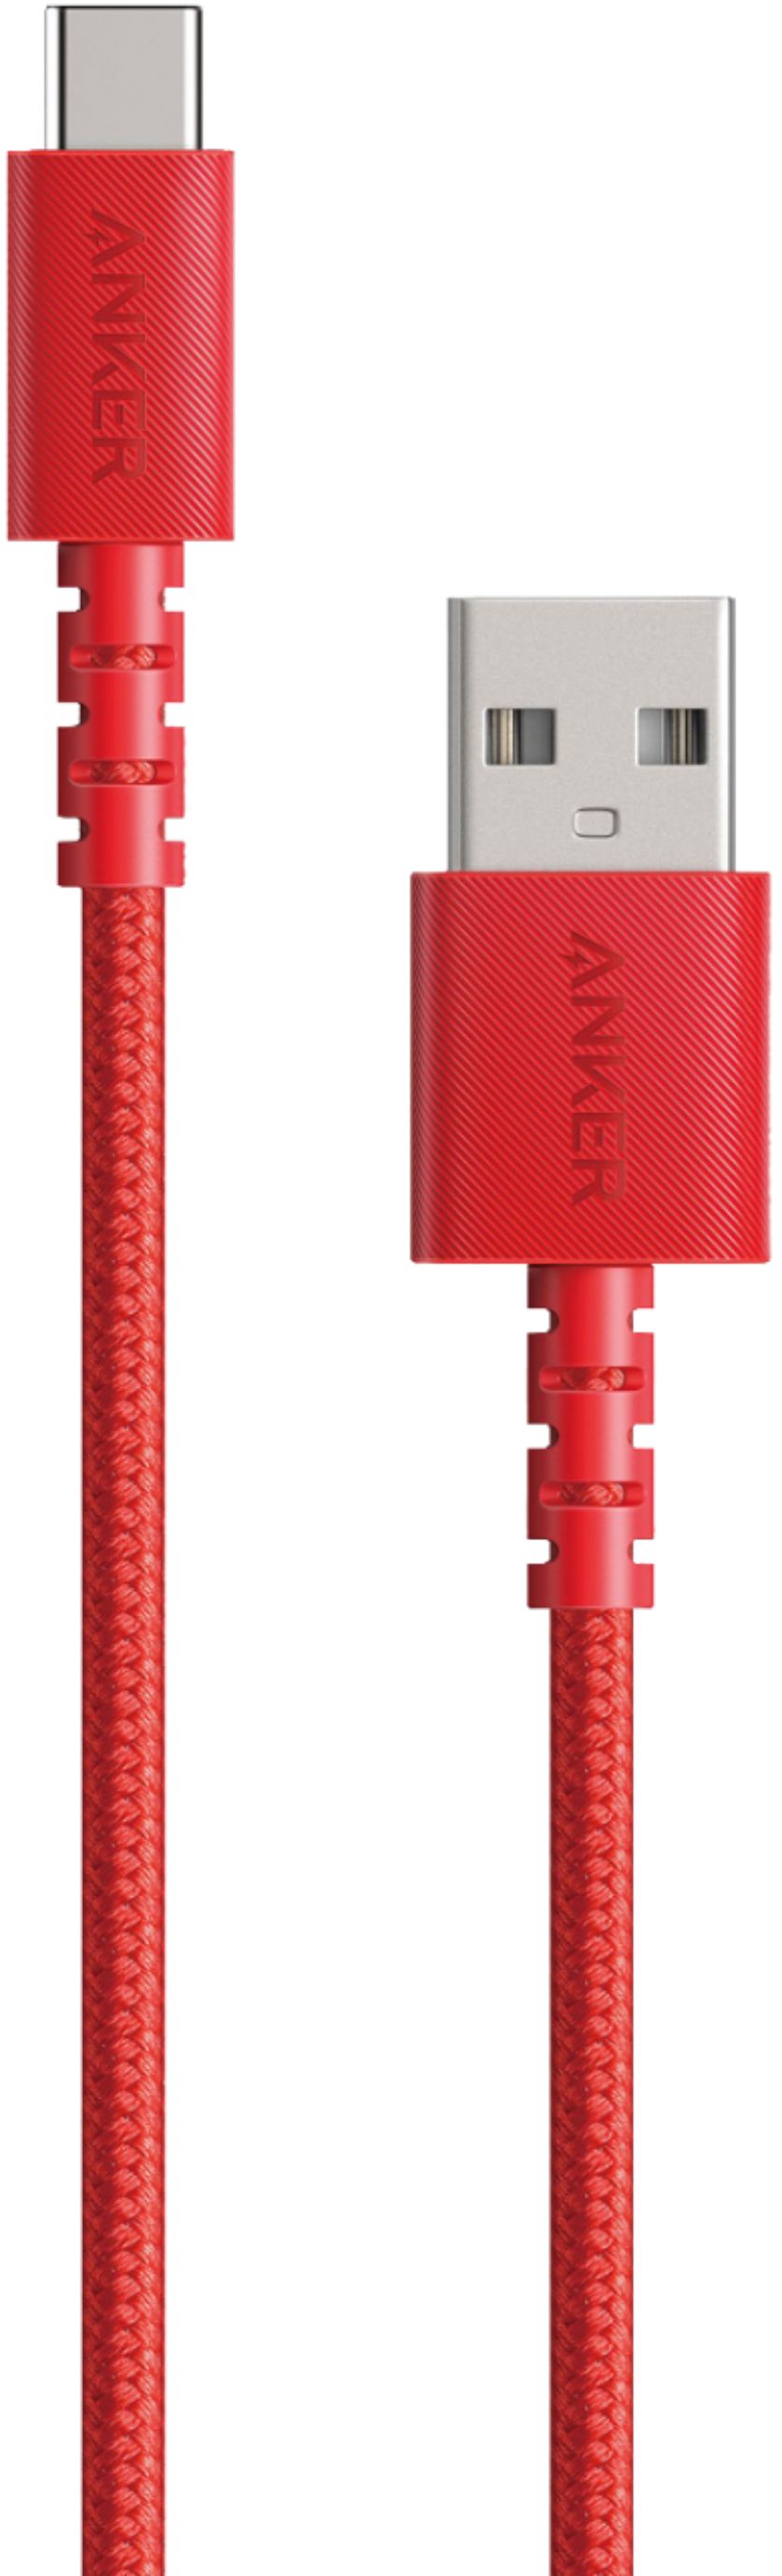 rig en gang Berolige Anker PowerLine Select+ USB-C to USB-A Cable 6-ft Red A8023H91-1 - Best Buy